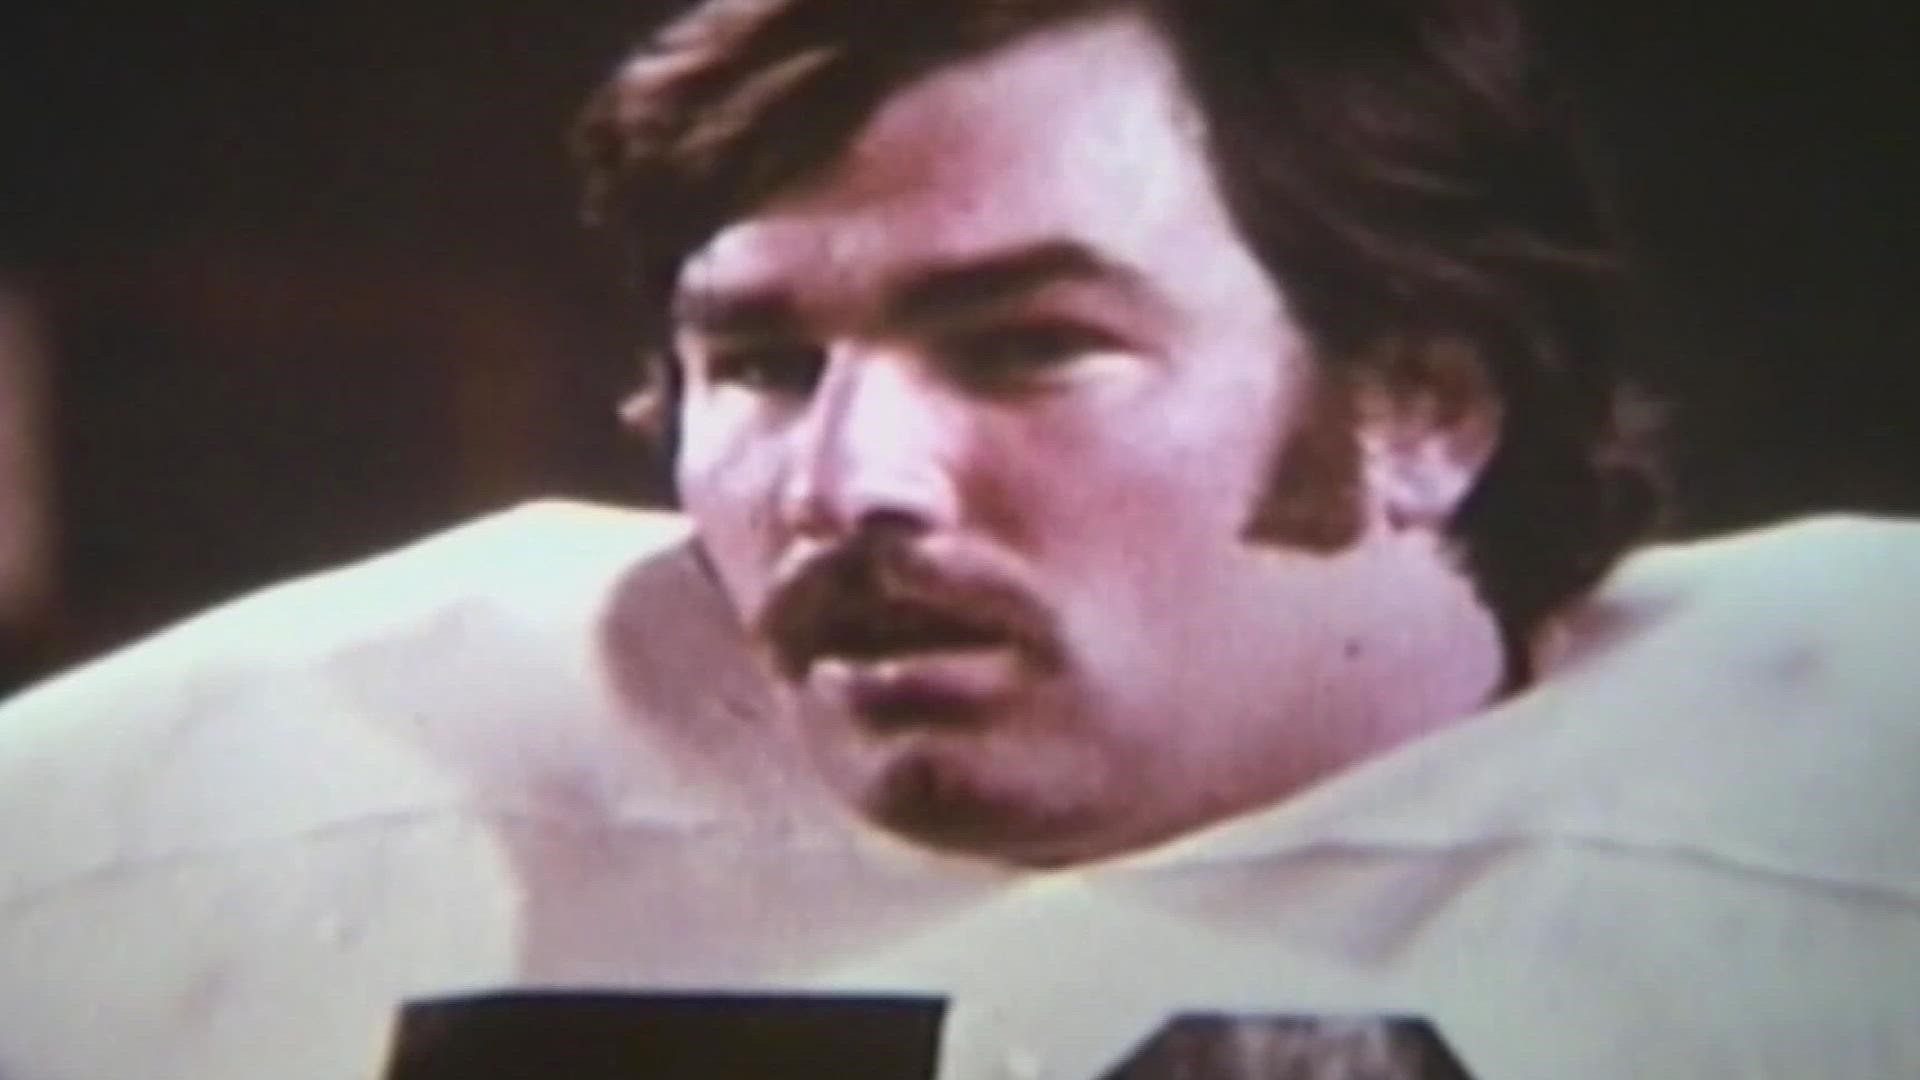 Following his retirement after the 1984 season, Dieken became a color commentator on Browns radio broadcasts.